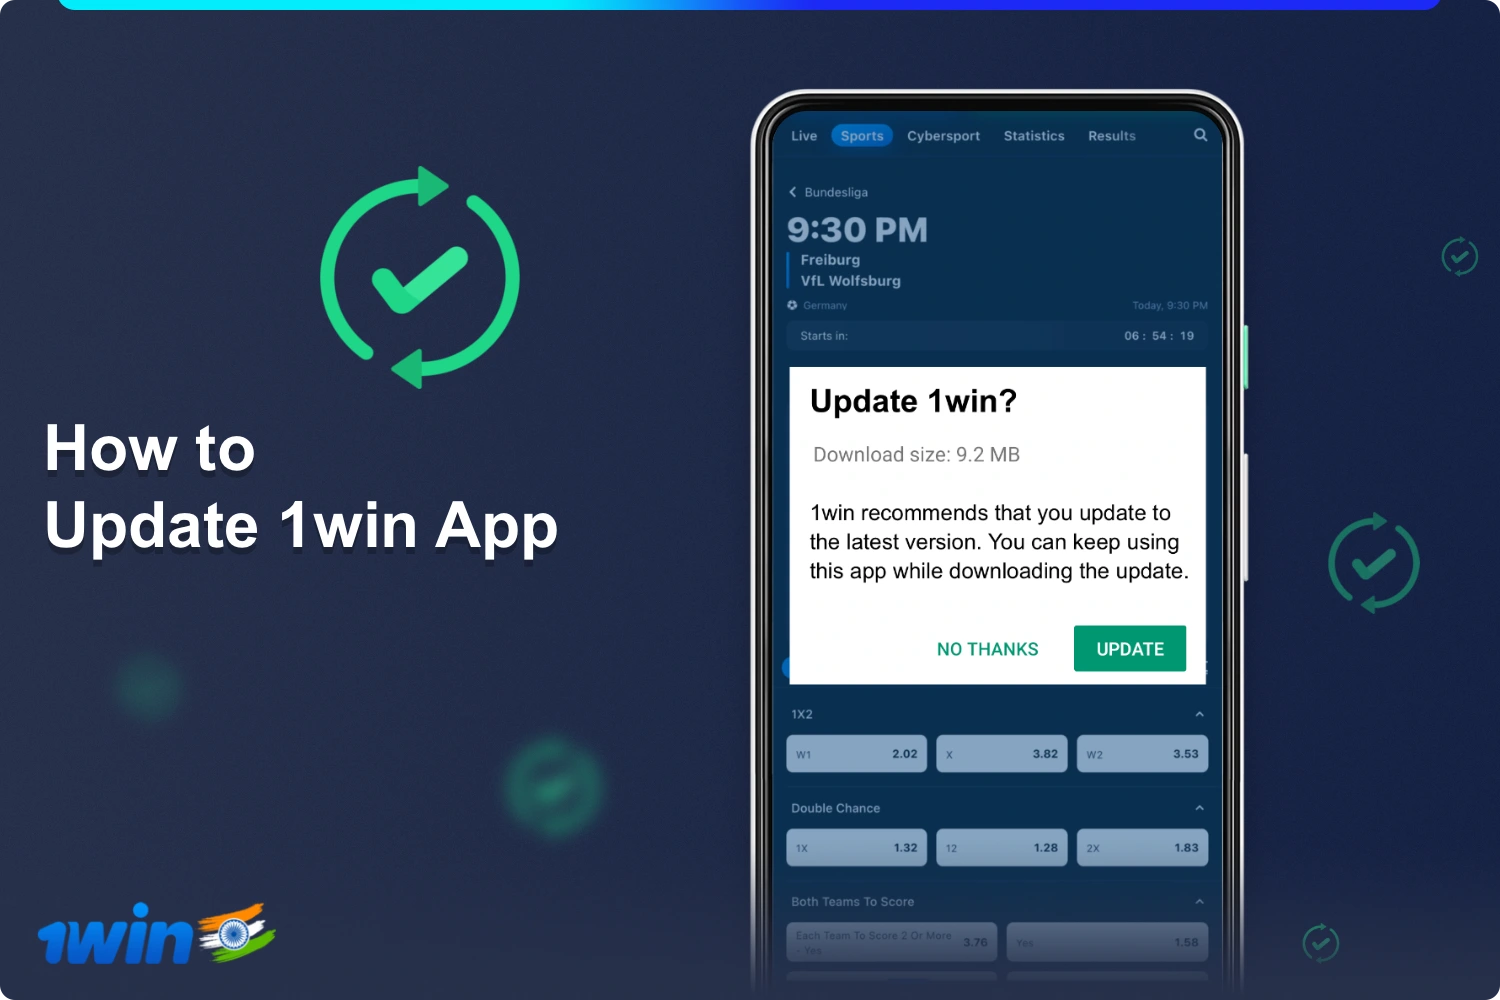 In order to update the app 1win you need to perform a few simple steps